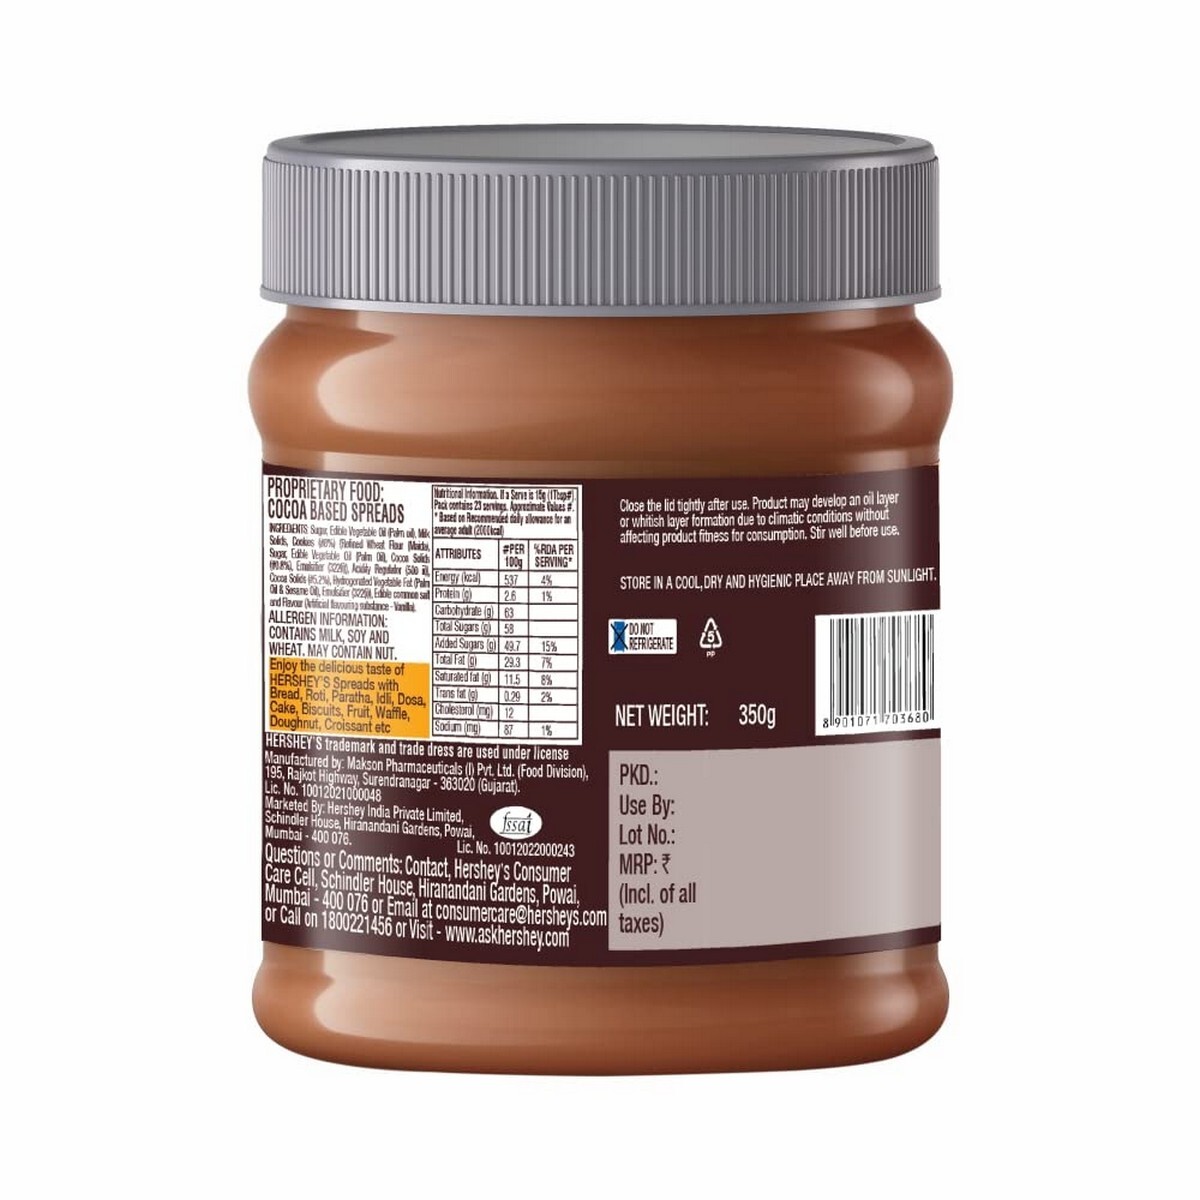 Hersheys Spreads - Cocoa With Cookies 350g